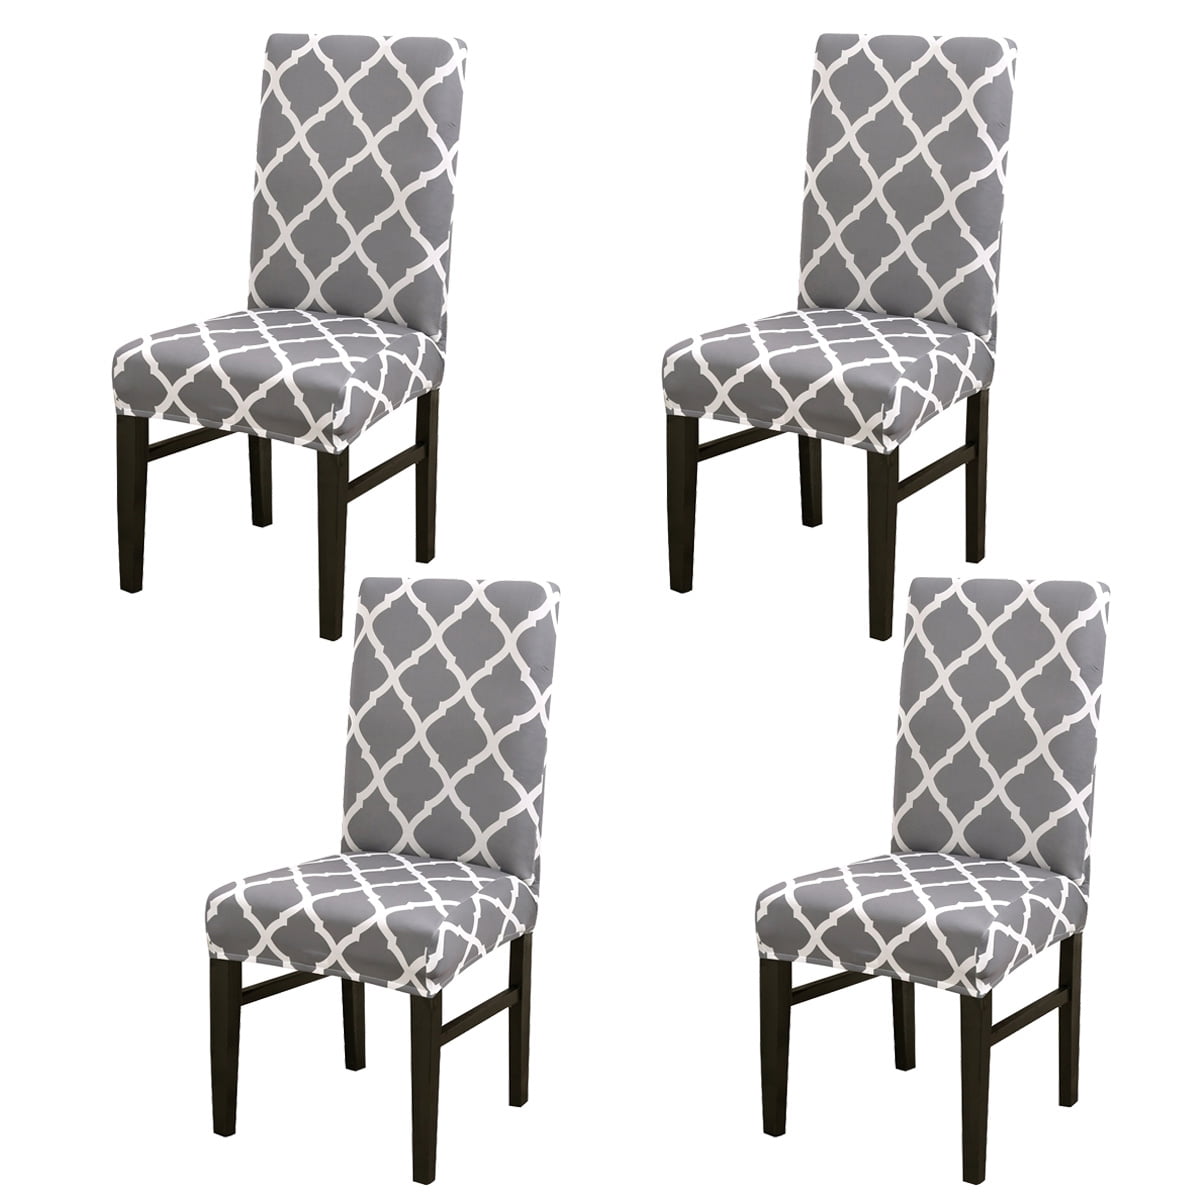 Style B Aisaving Stretch Dining Chair Cover 4pcs Spandex Dining Chair Covers Removable Washable Universal Protector Cover Seat Slipcover for Hotel Dining Room Ceremony Banquet Wedding Party 